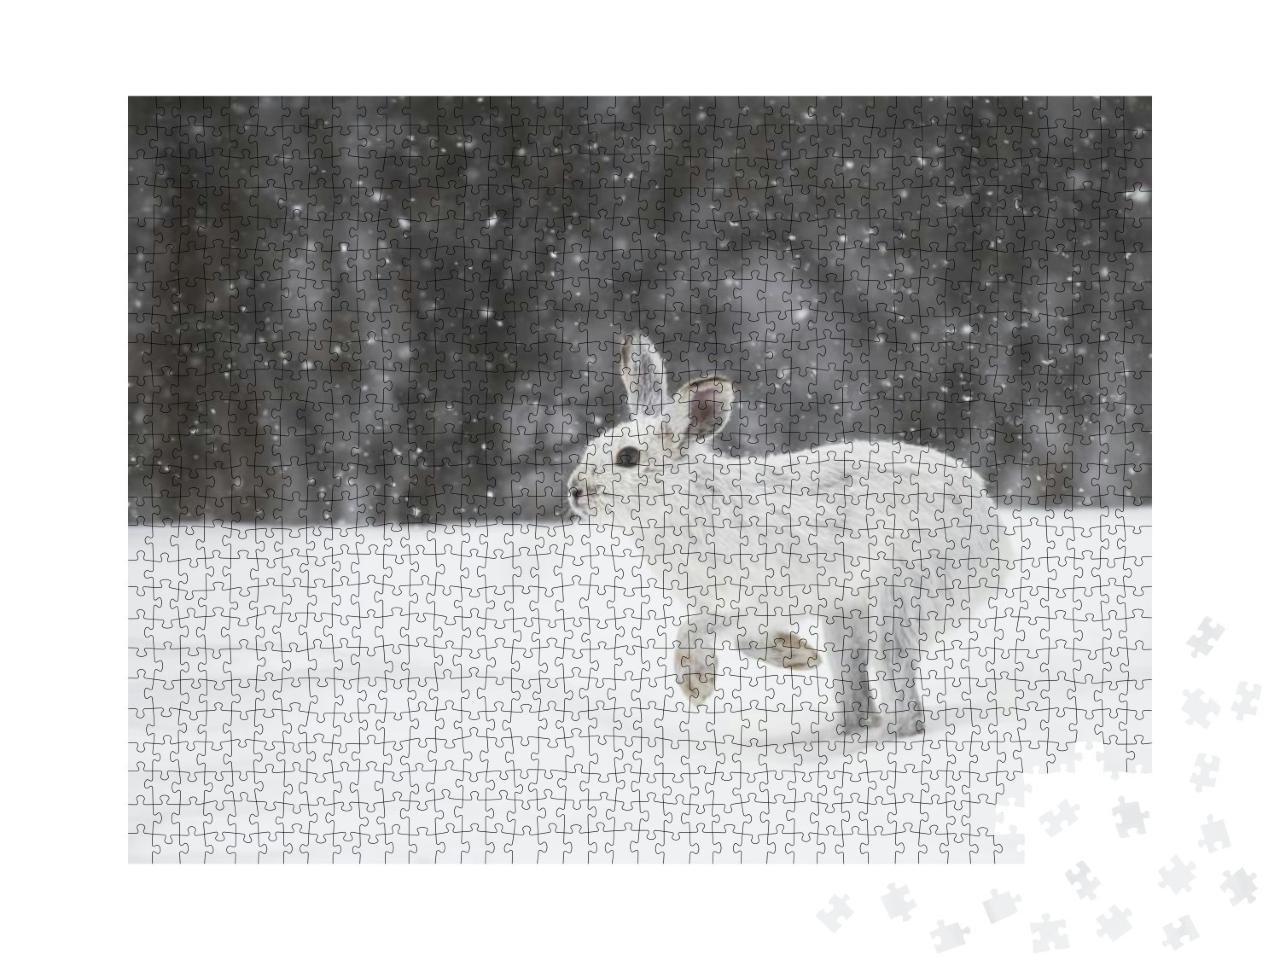 White Snowshoe Hare or Varying Hare Running in the Fallin... Jigsaw Puzzle with 1000 pieces